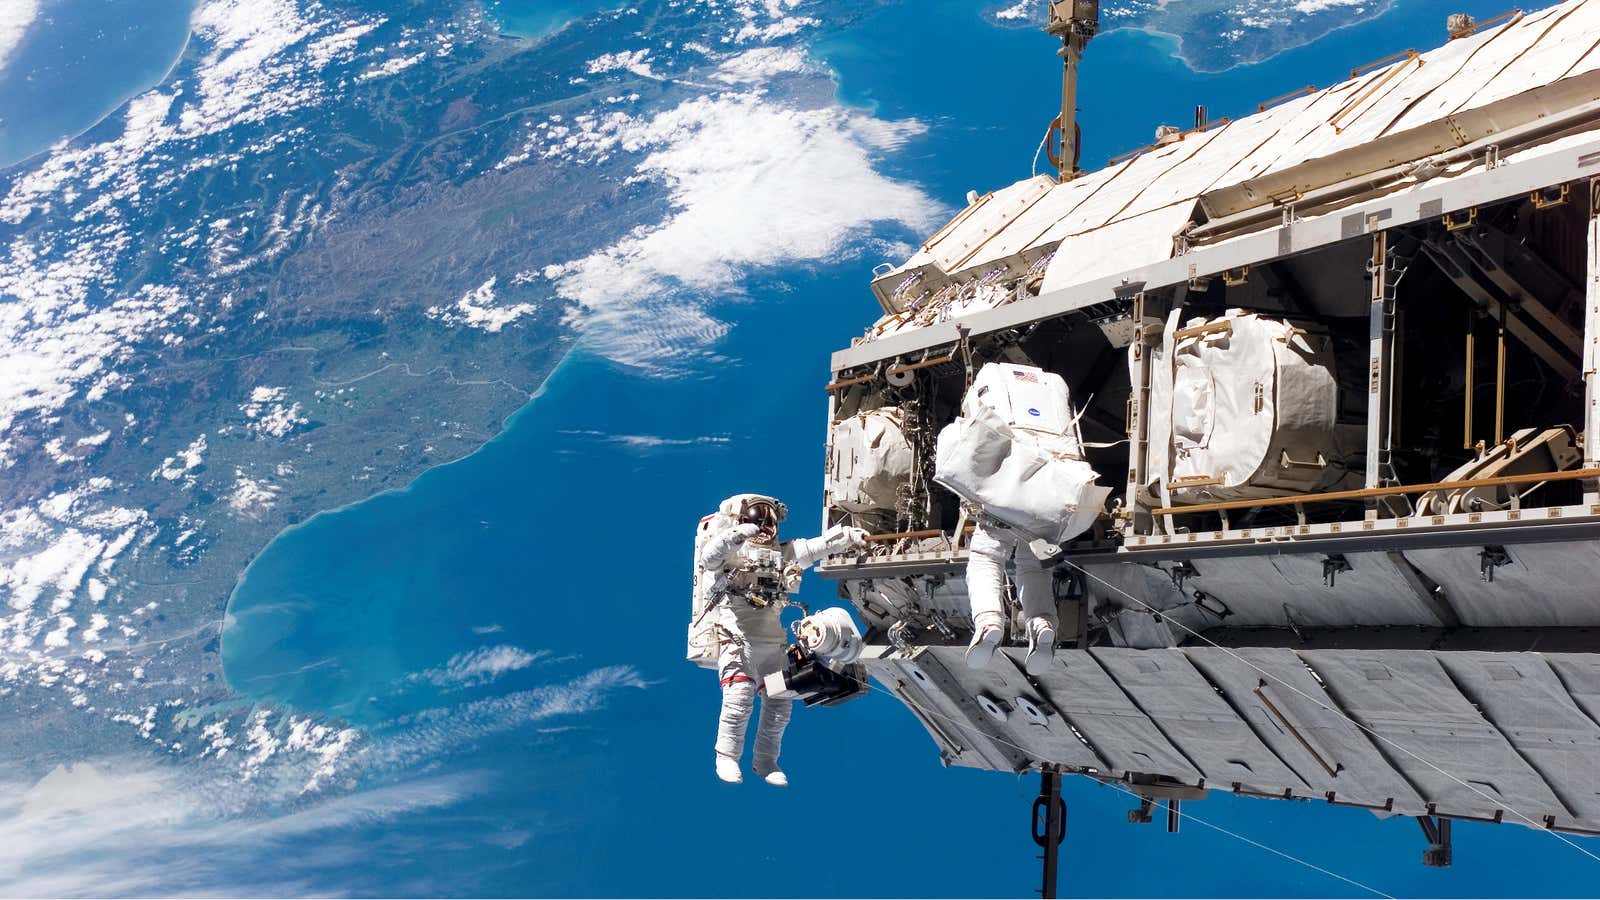 Two astronauts construct the International Space Station over New Zealand in 2006.